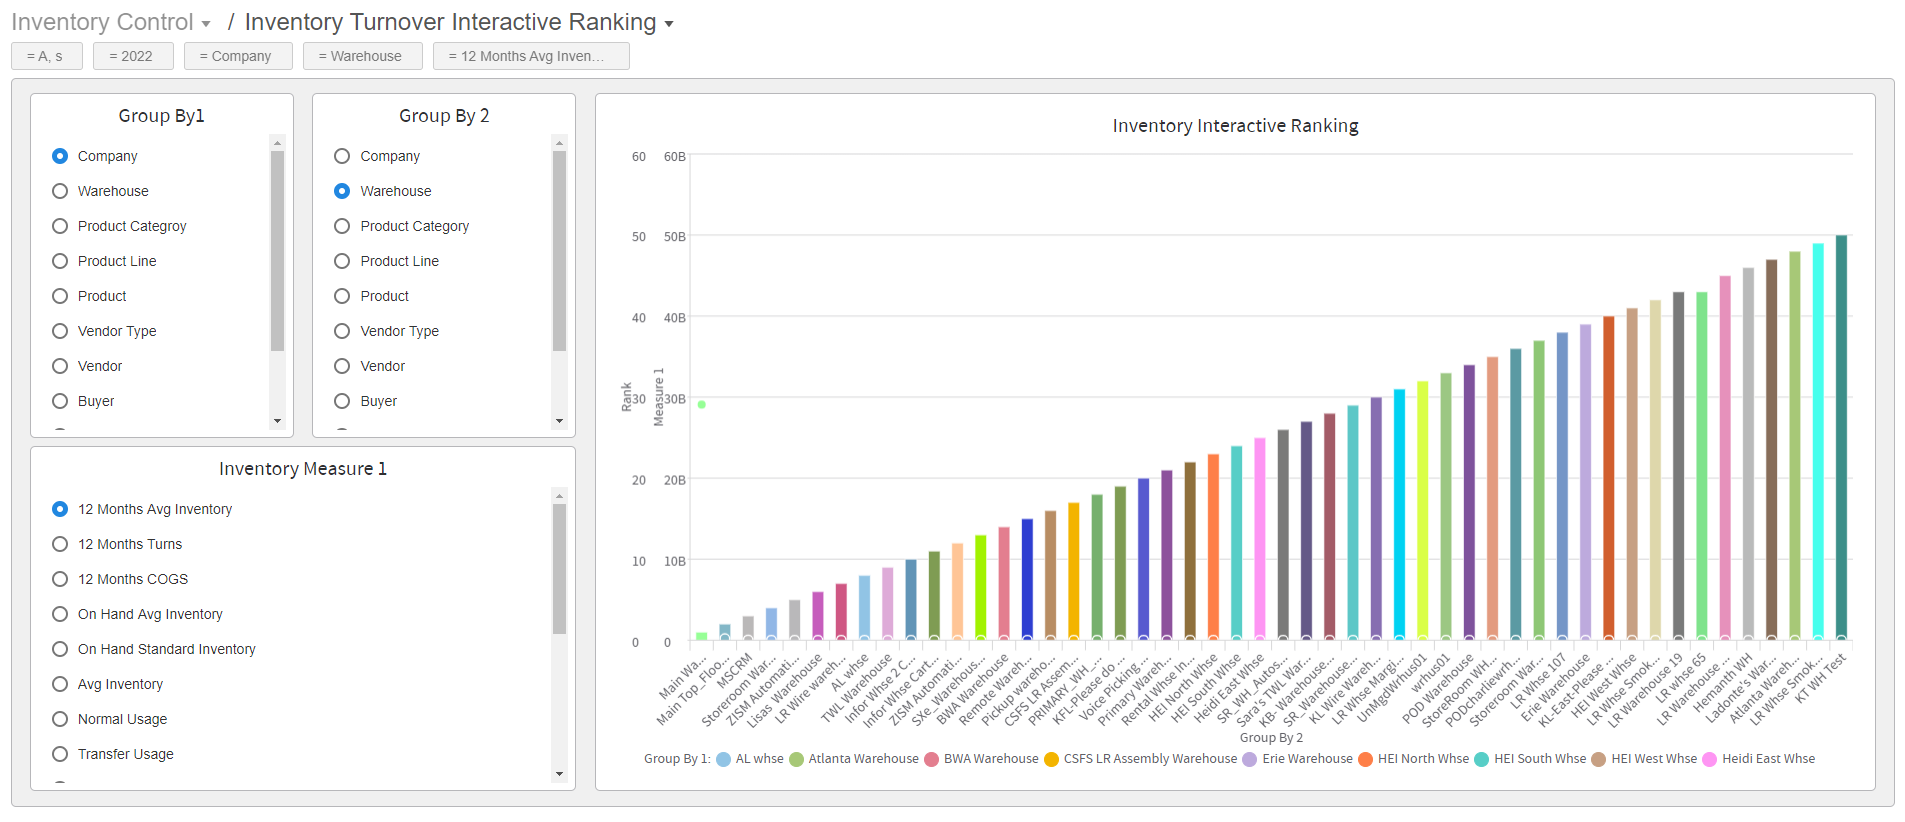 Inventory Turnover Interactive Ranking dashboard